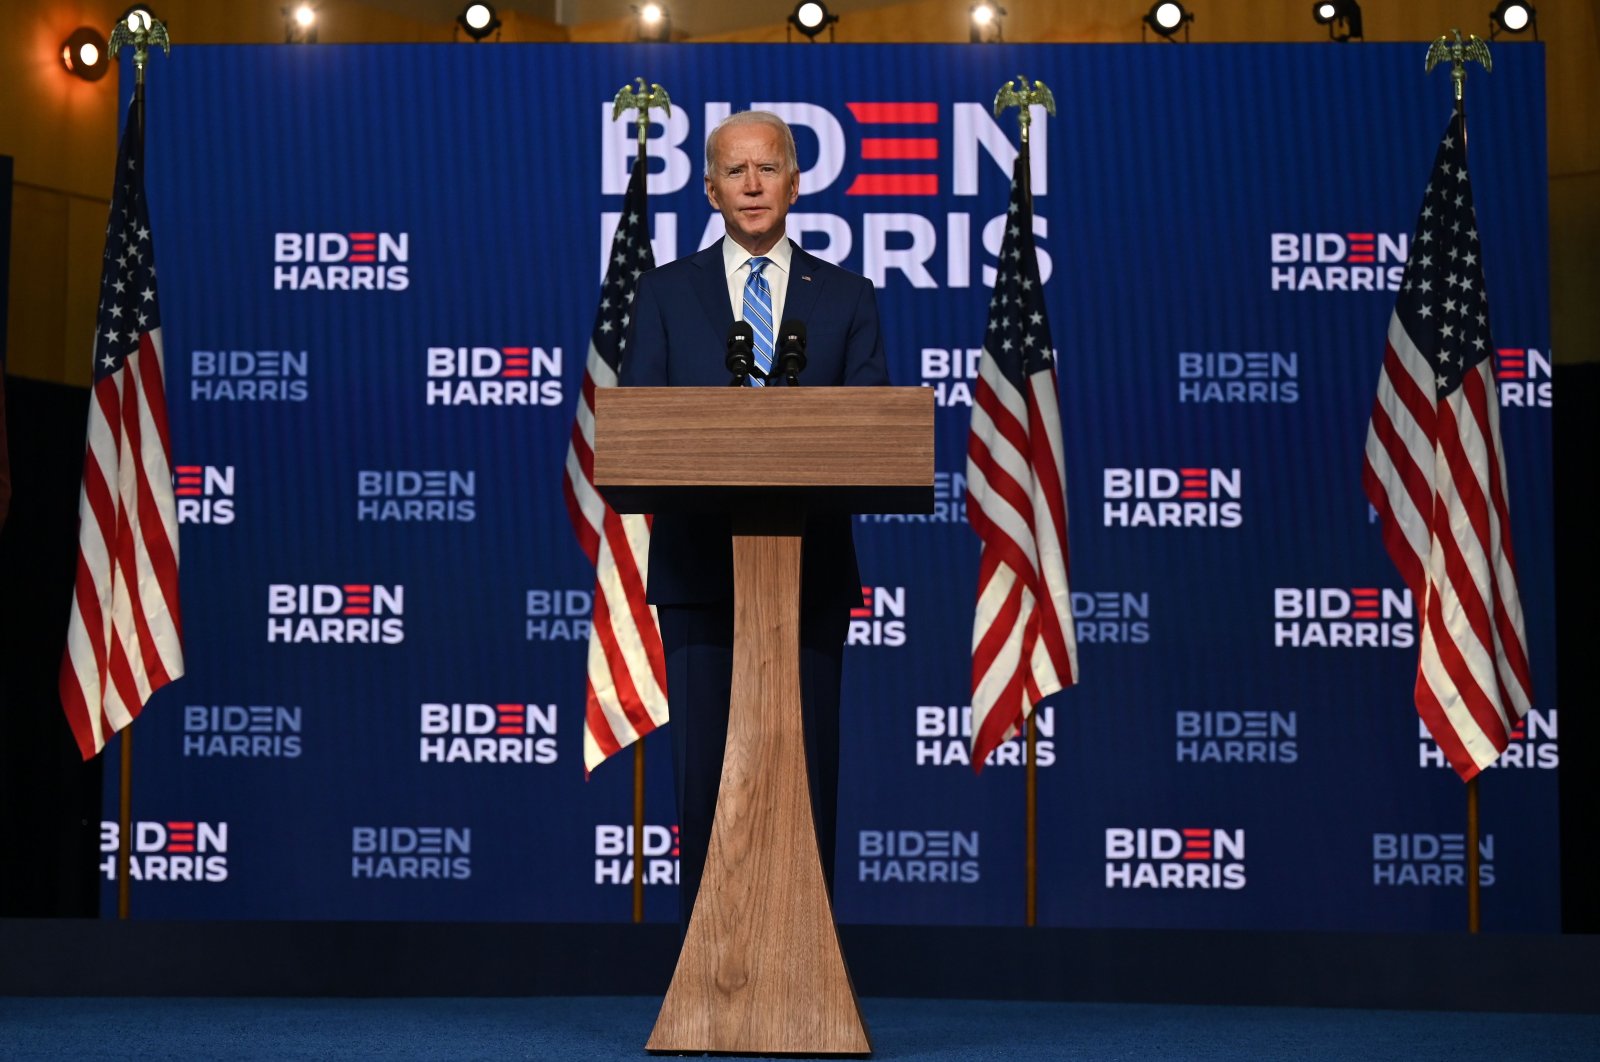 Democratic presidential candidate Joe Biden speaks at a news conference at the Chase Center in Wilmington, Delaware, Nov. 4, 2020. (AFP Photo)